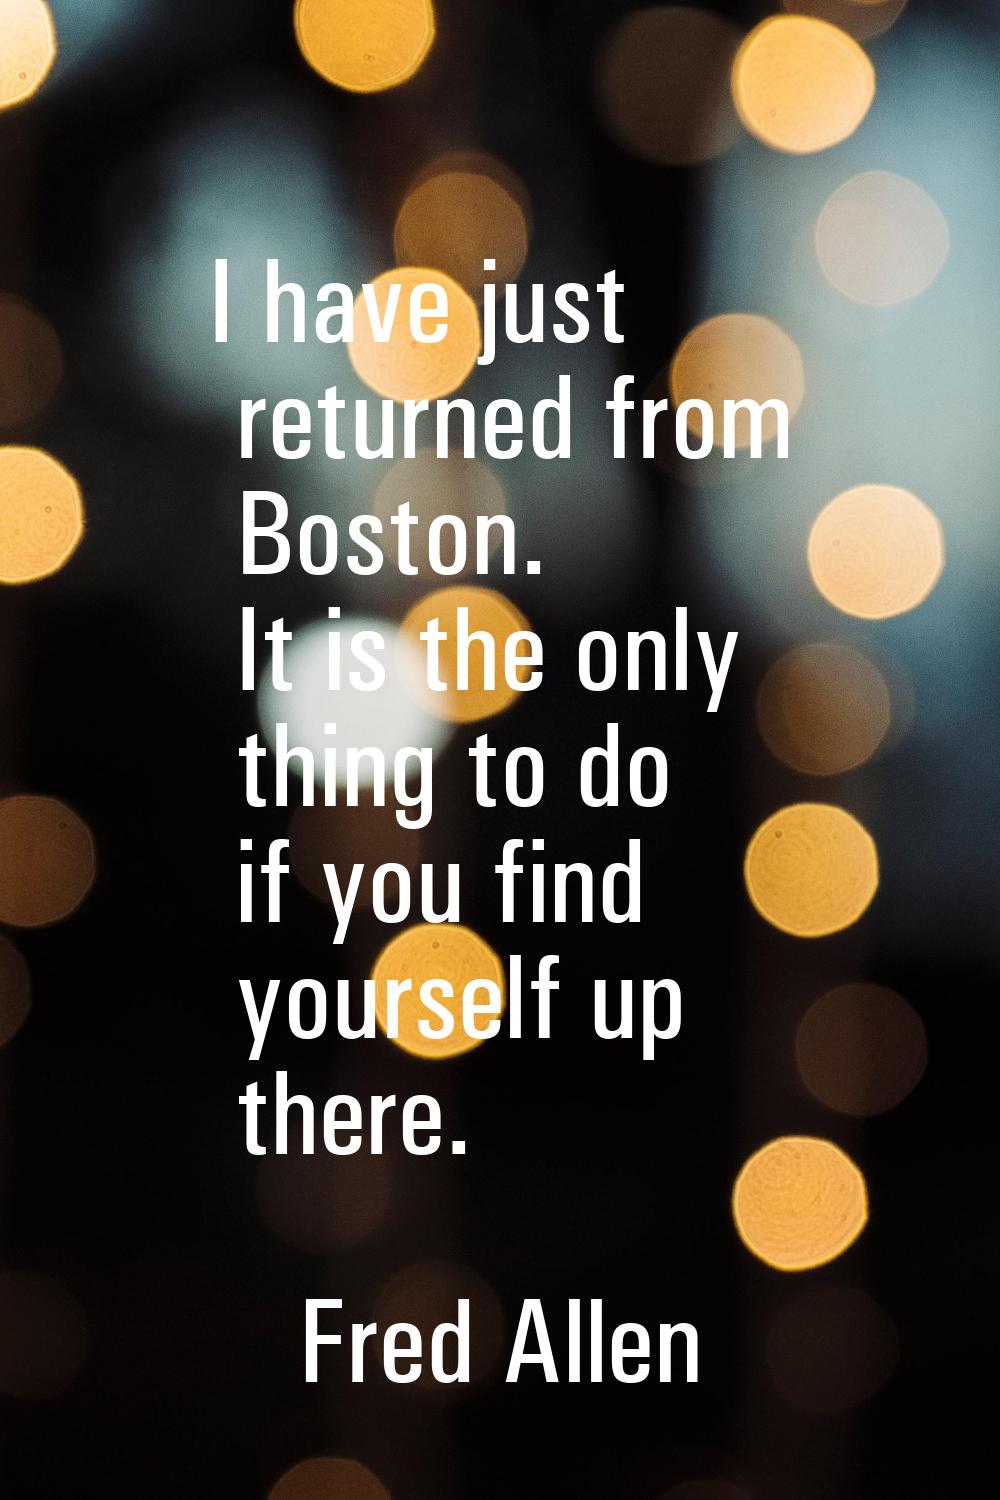 I have just returned from Boston. It is the only thing to do if you find yourself up there.